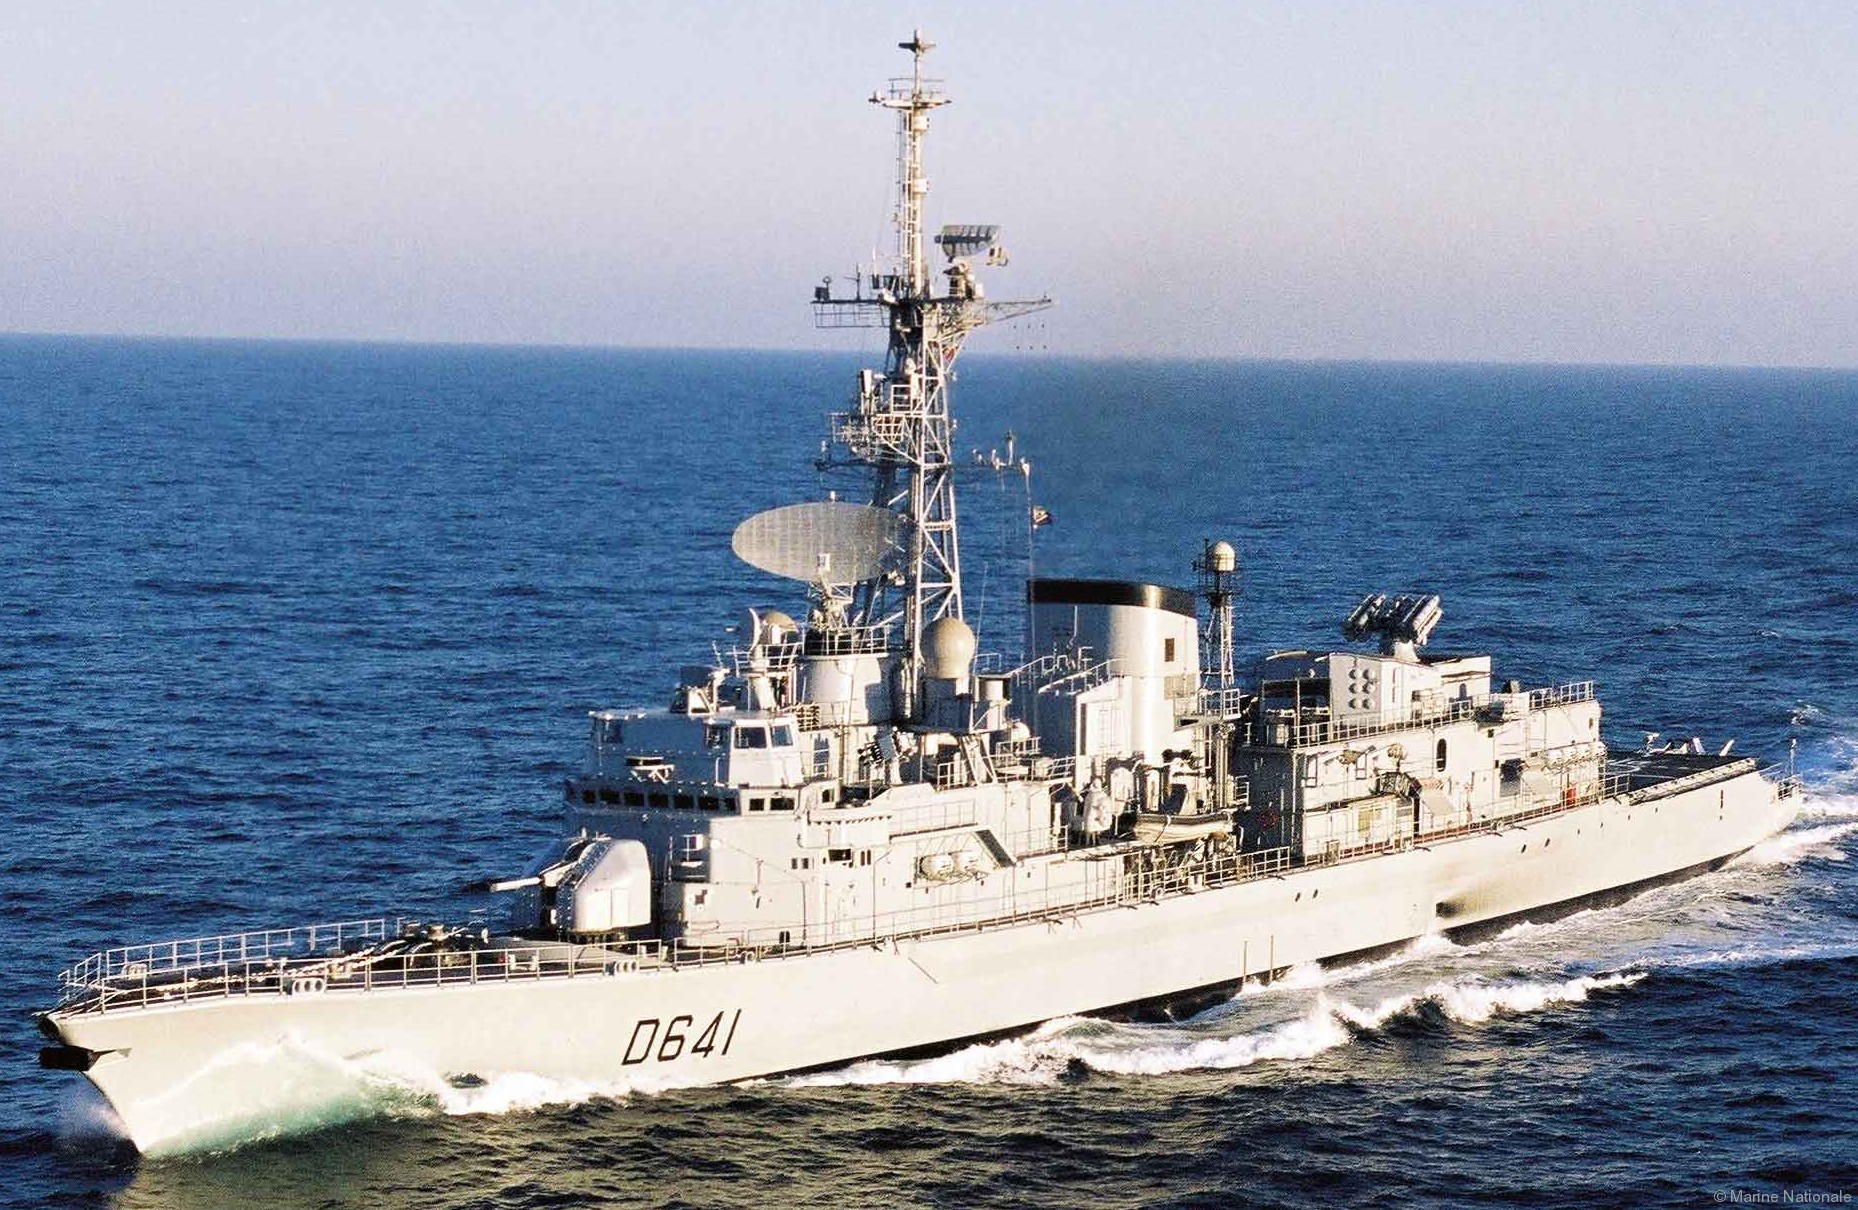 d-641 fs dupleix georges leygues f70as class anti submarine frigate asw french navy marine nationale 04